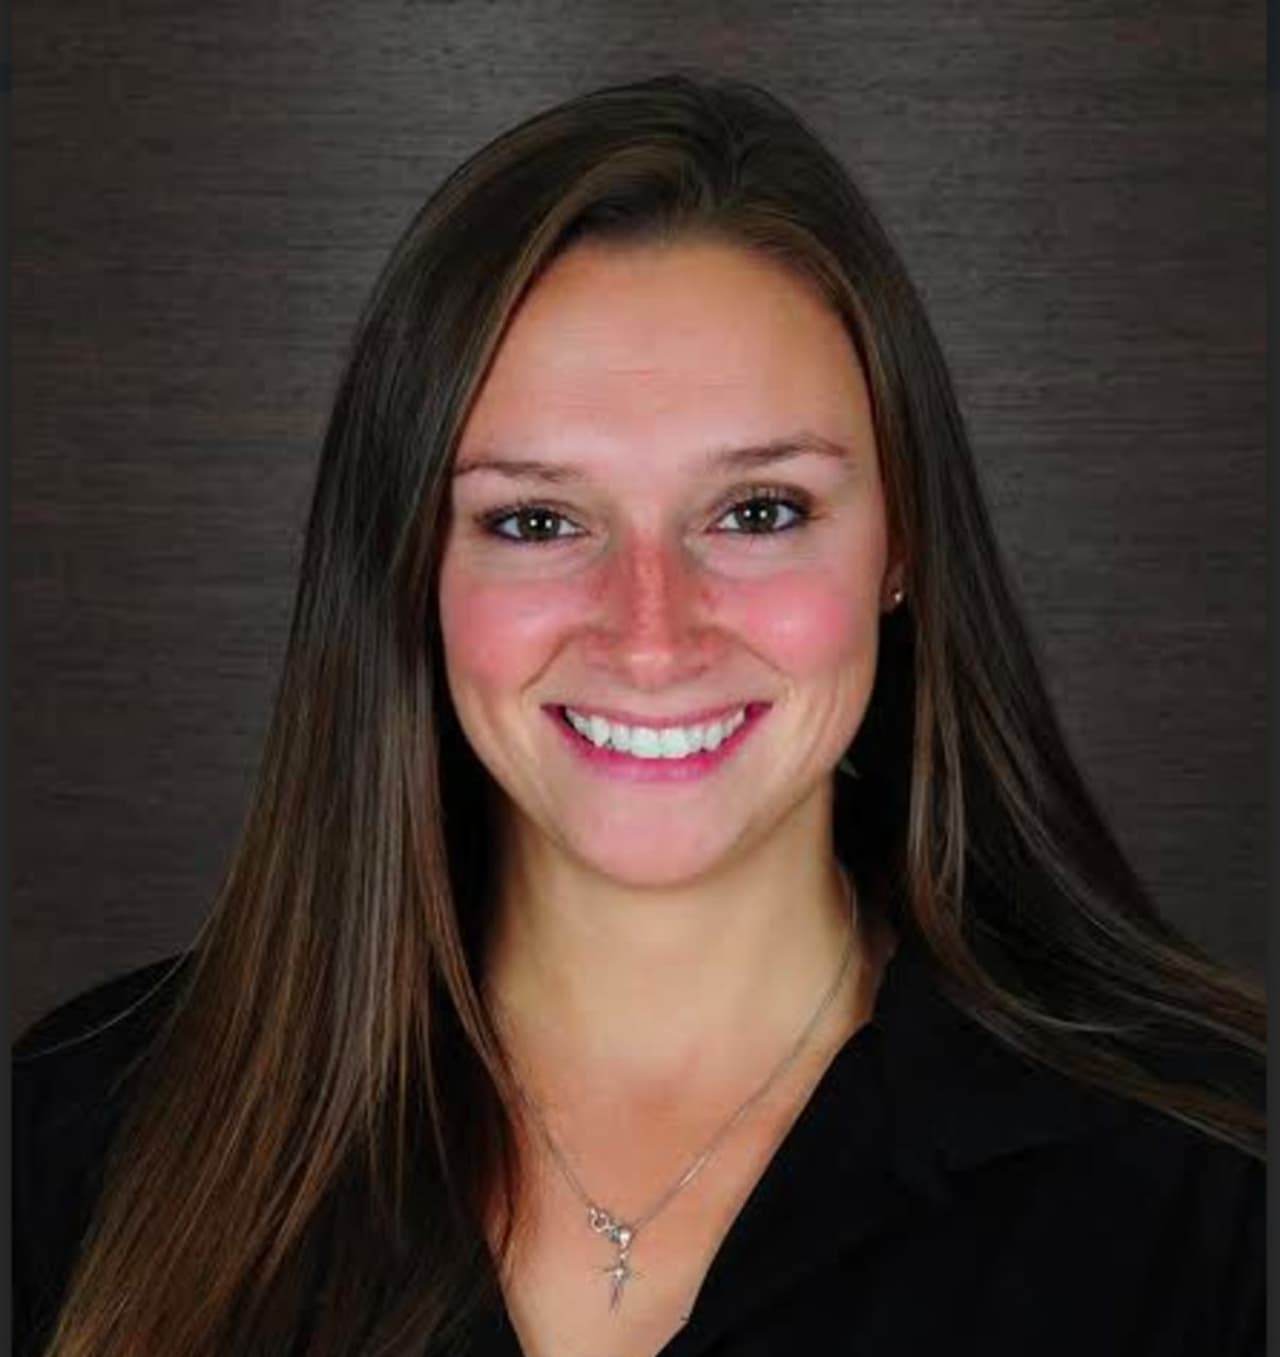 Katie Simco has been named the new Assistant Fitness Director at Saw Mill Club.